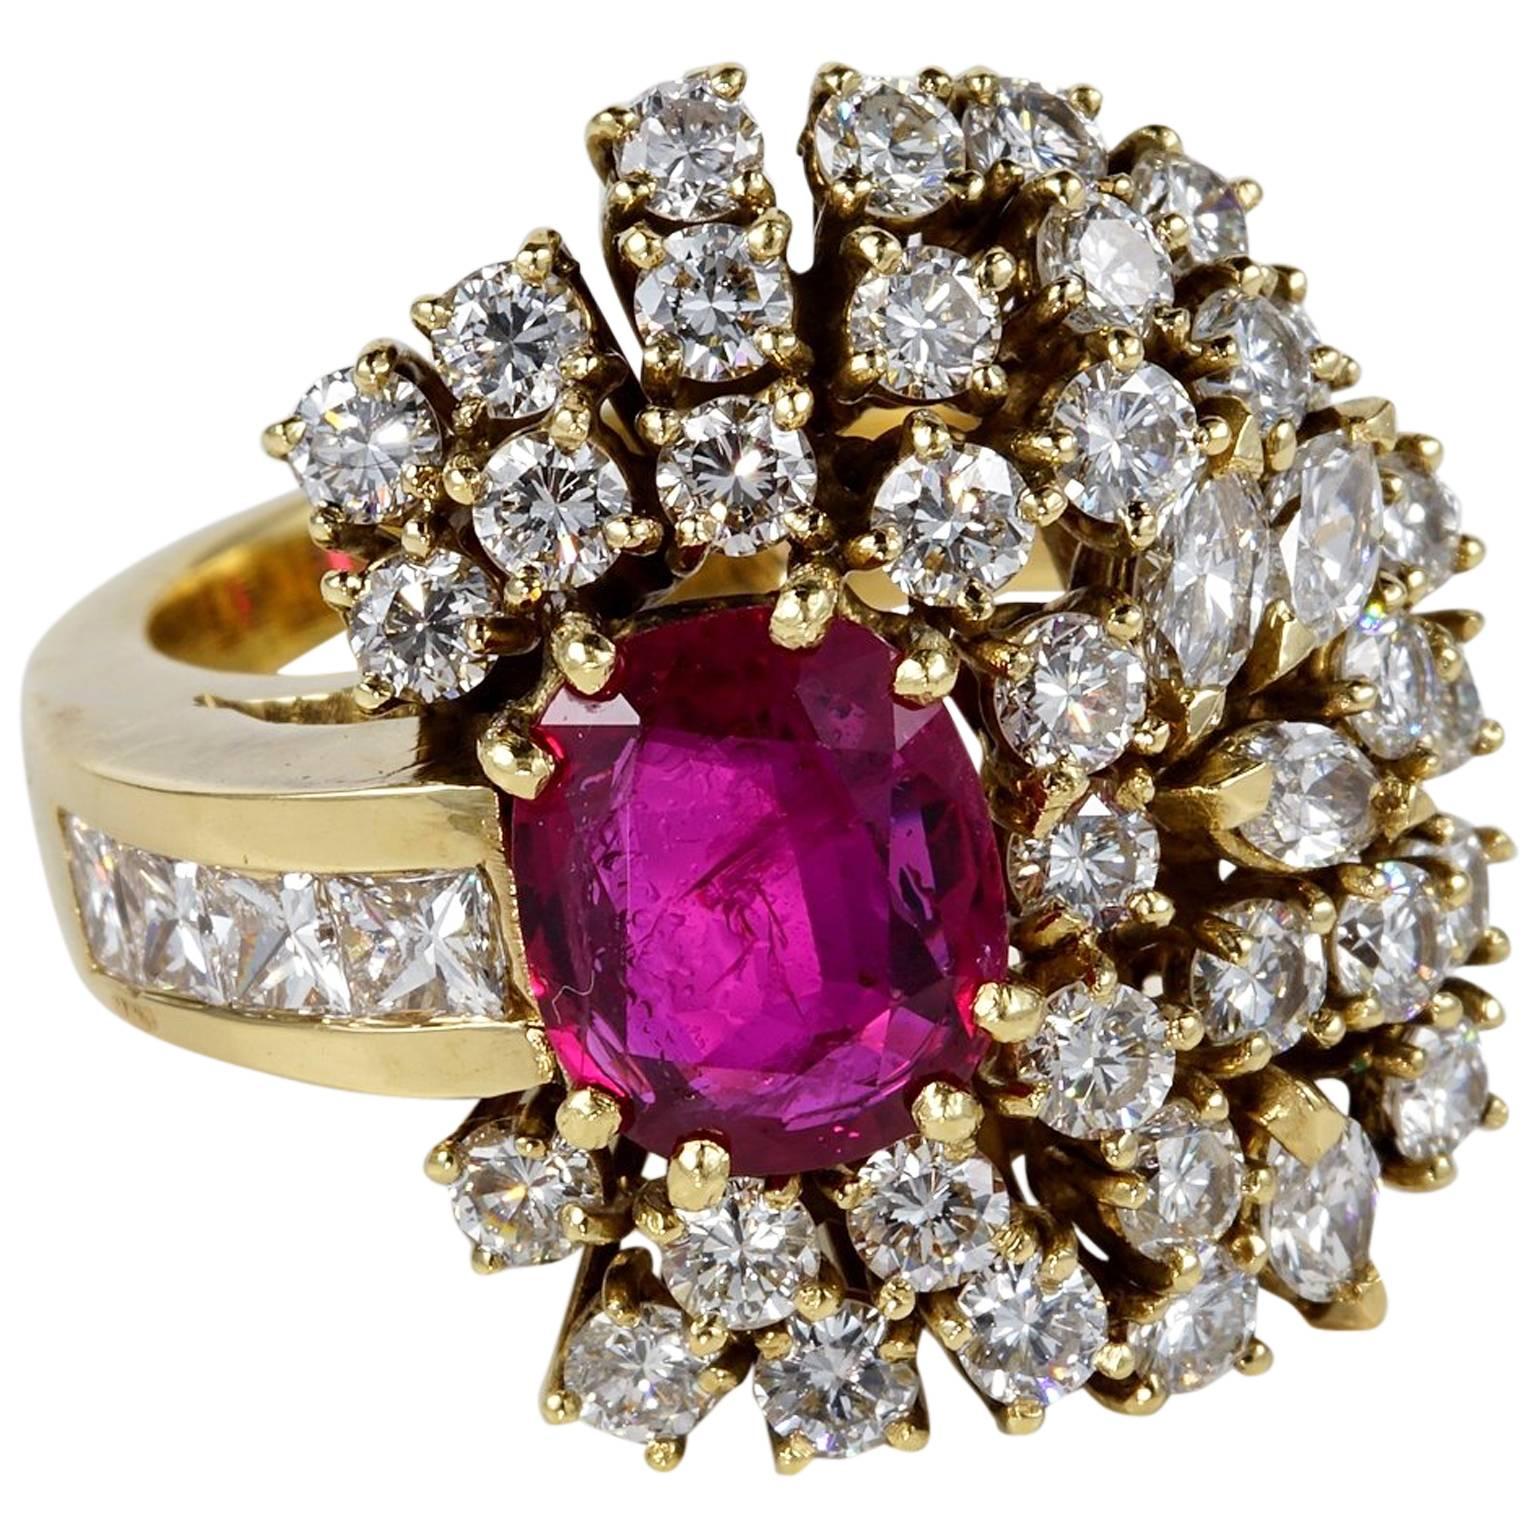 Vintage 2.20 Natural Untreated Ruby Up 4.15 Carat Diamond Bombe Ring For Sale